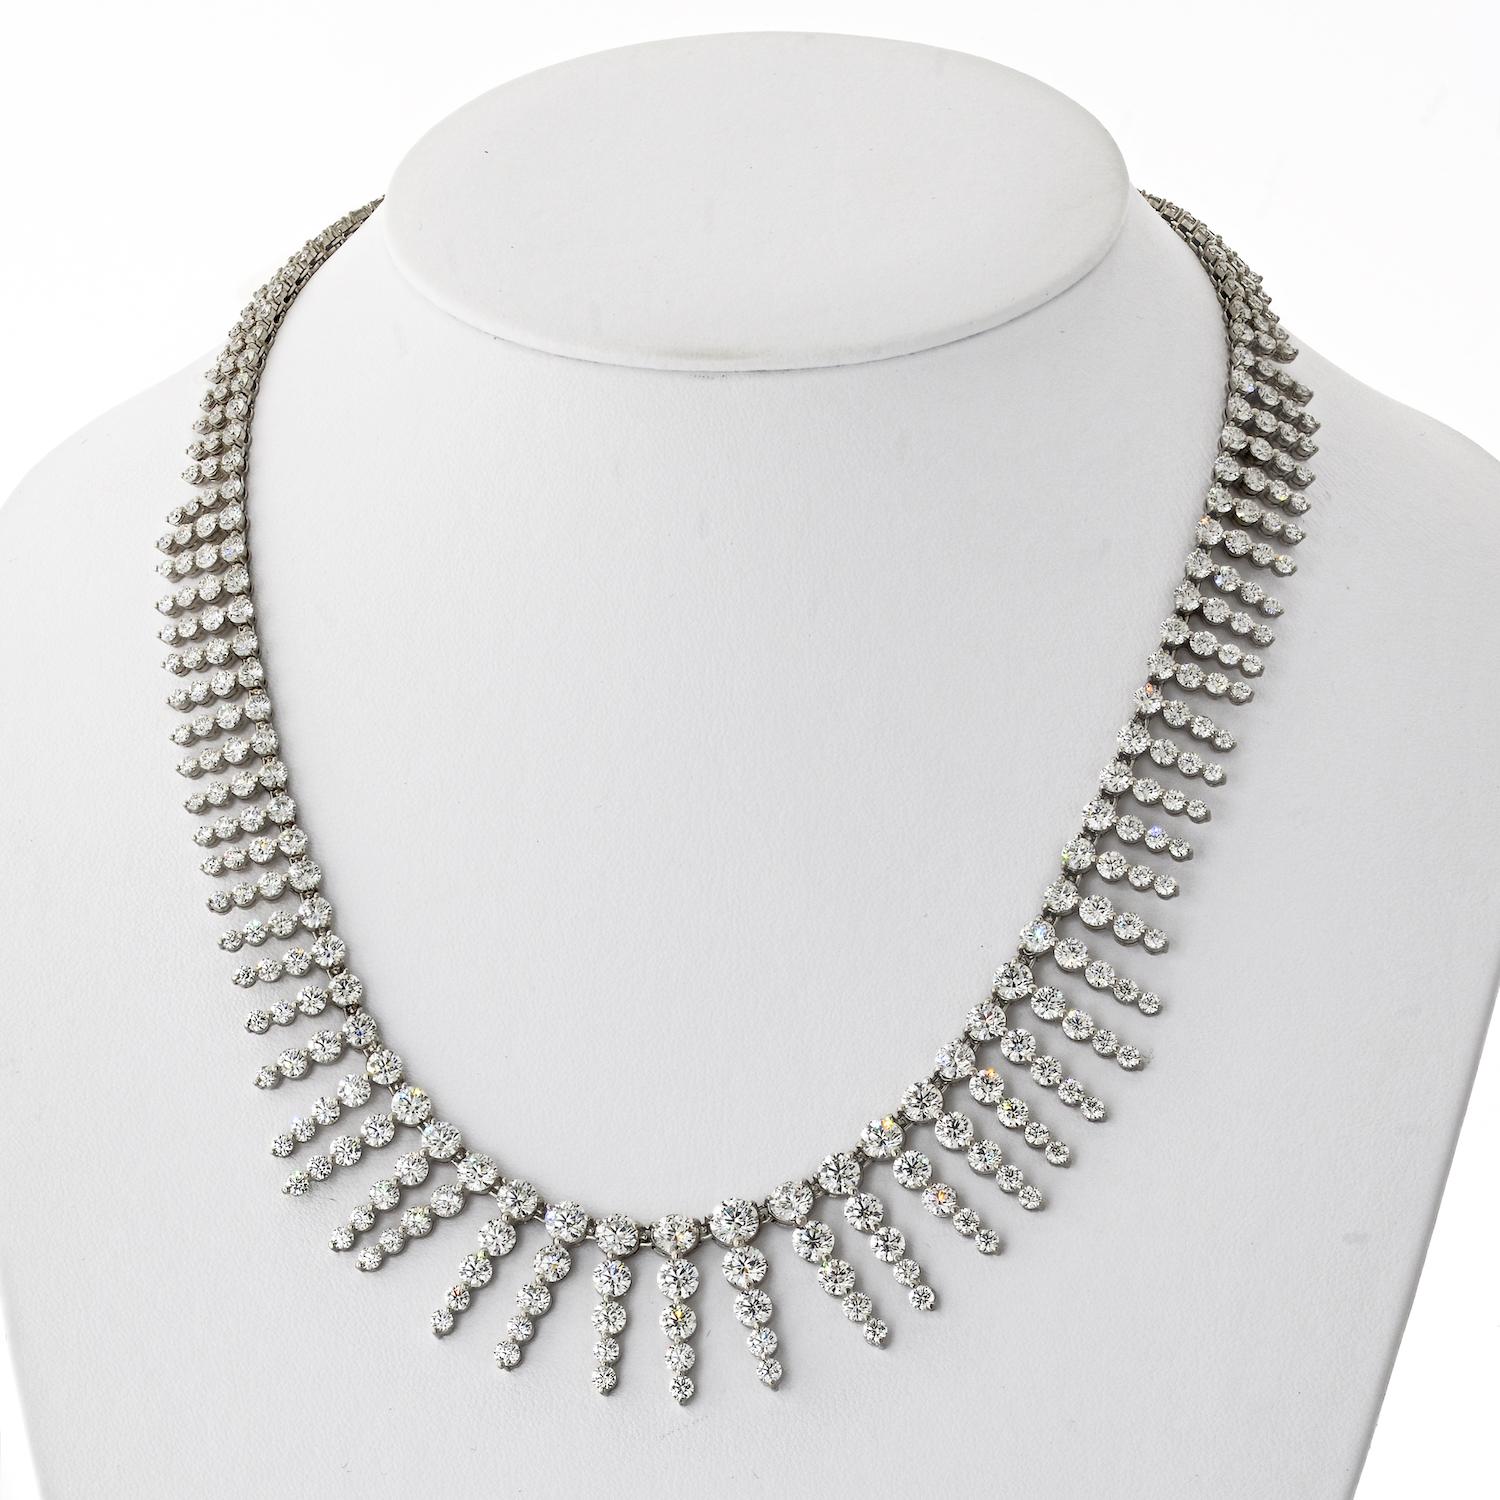 Drape yourself in the resplendent radiance of this Triple Dot Collar Diamond Necklace, a true embodiment of luxury and sophistication. Meticulously crafted in 18k white gold, this opulent piece boasts a stunning arrangement of 190 round diamonds,